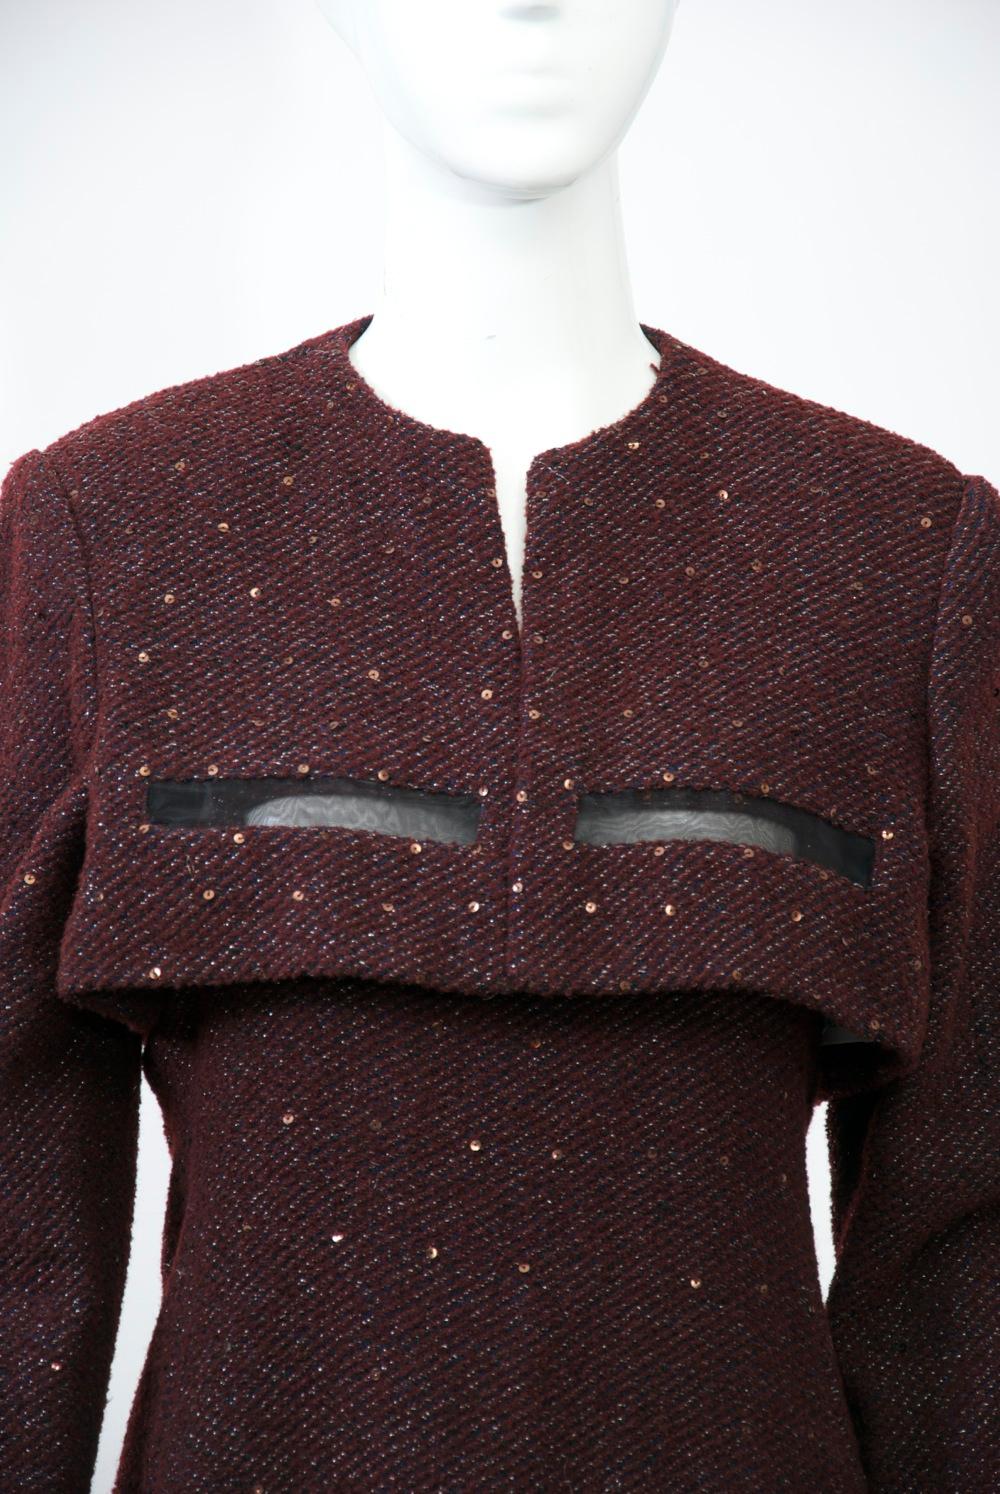 Chic Geoffrey Beene ensemble consisting of a slip dress and a bolero jacket crafted of a lightweight burgundy knit shot through with silver threads and accented with subtle sequins throughout. Each piece features overlapping rectangular “windows” of